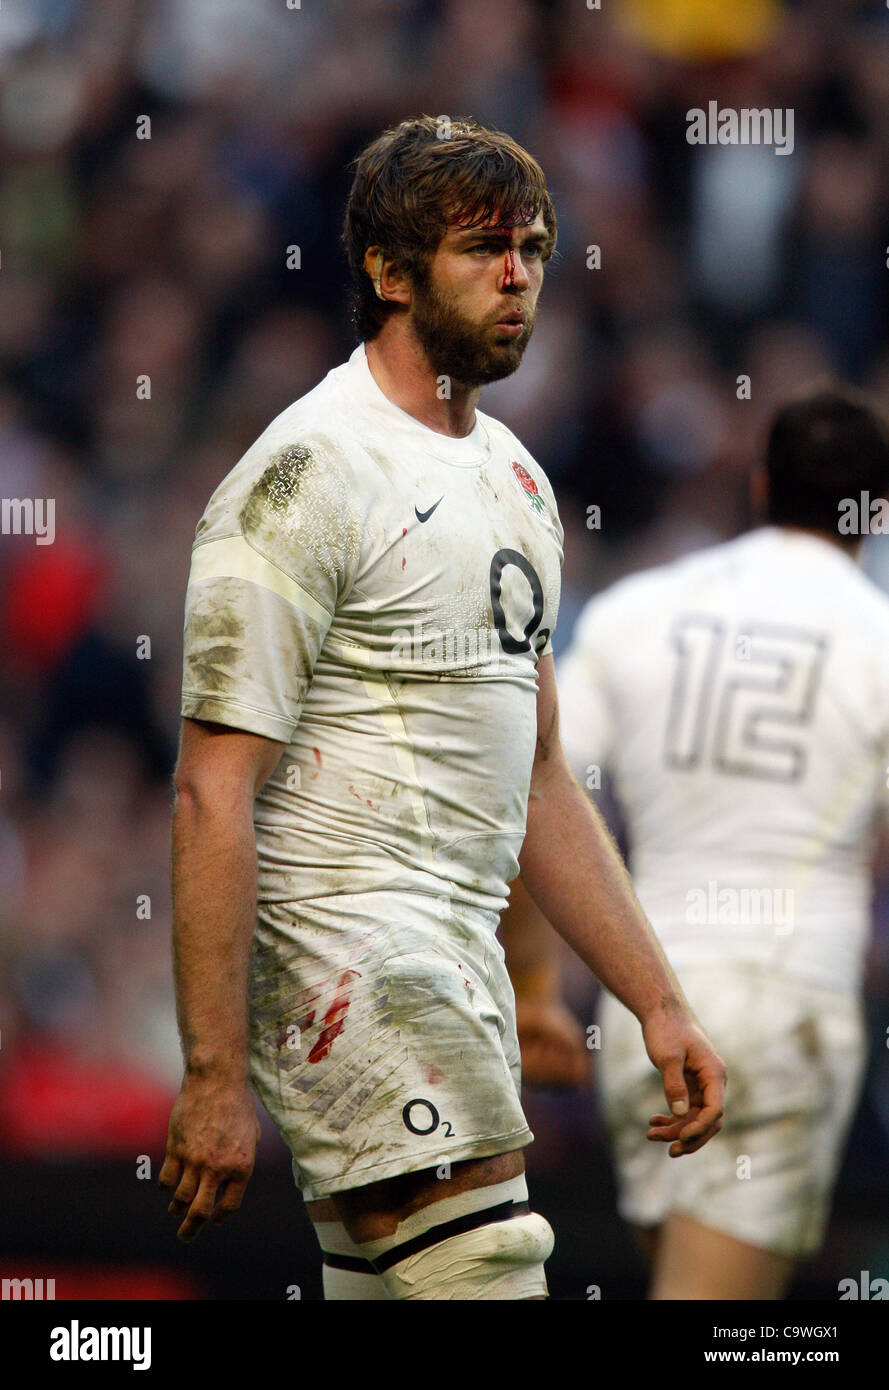 BLOODIED GEOFF PARLING ENGLAND V WALES TWICKENHAM MIDDLESEX ENGLAND 25 February 2012 Stock Photo